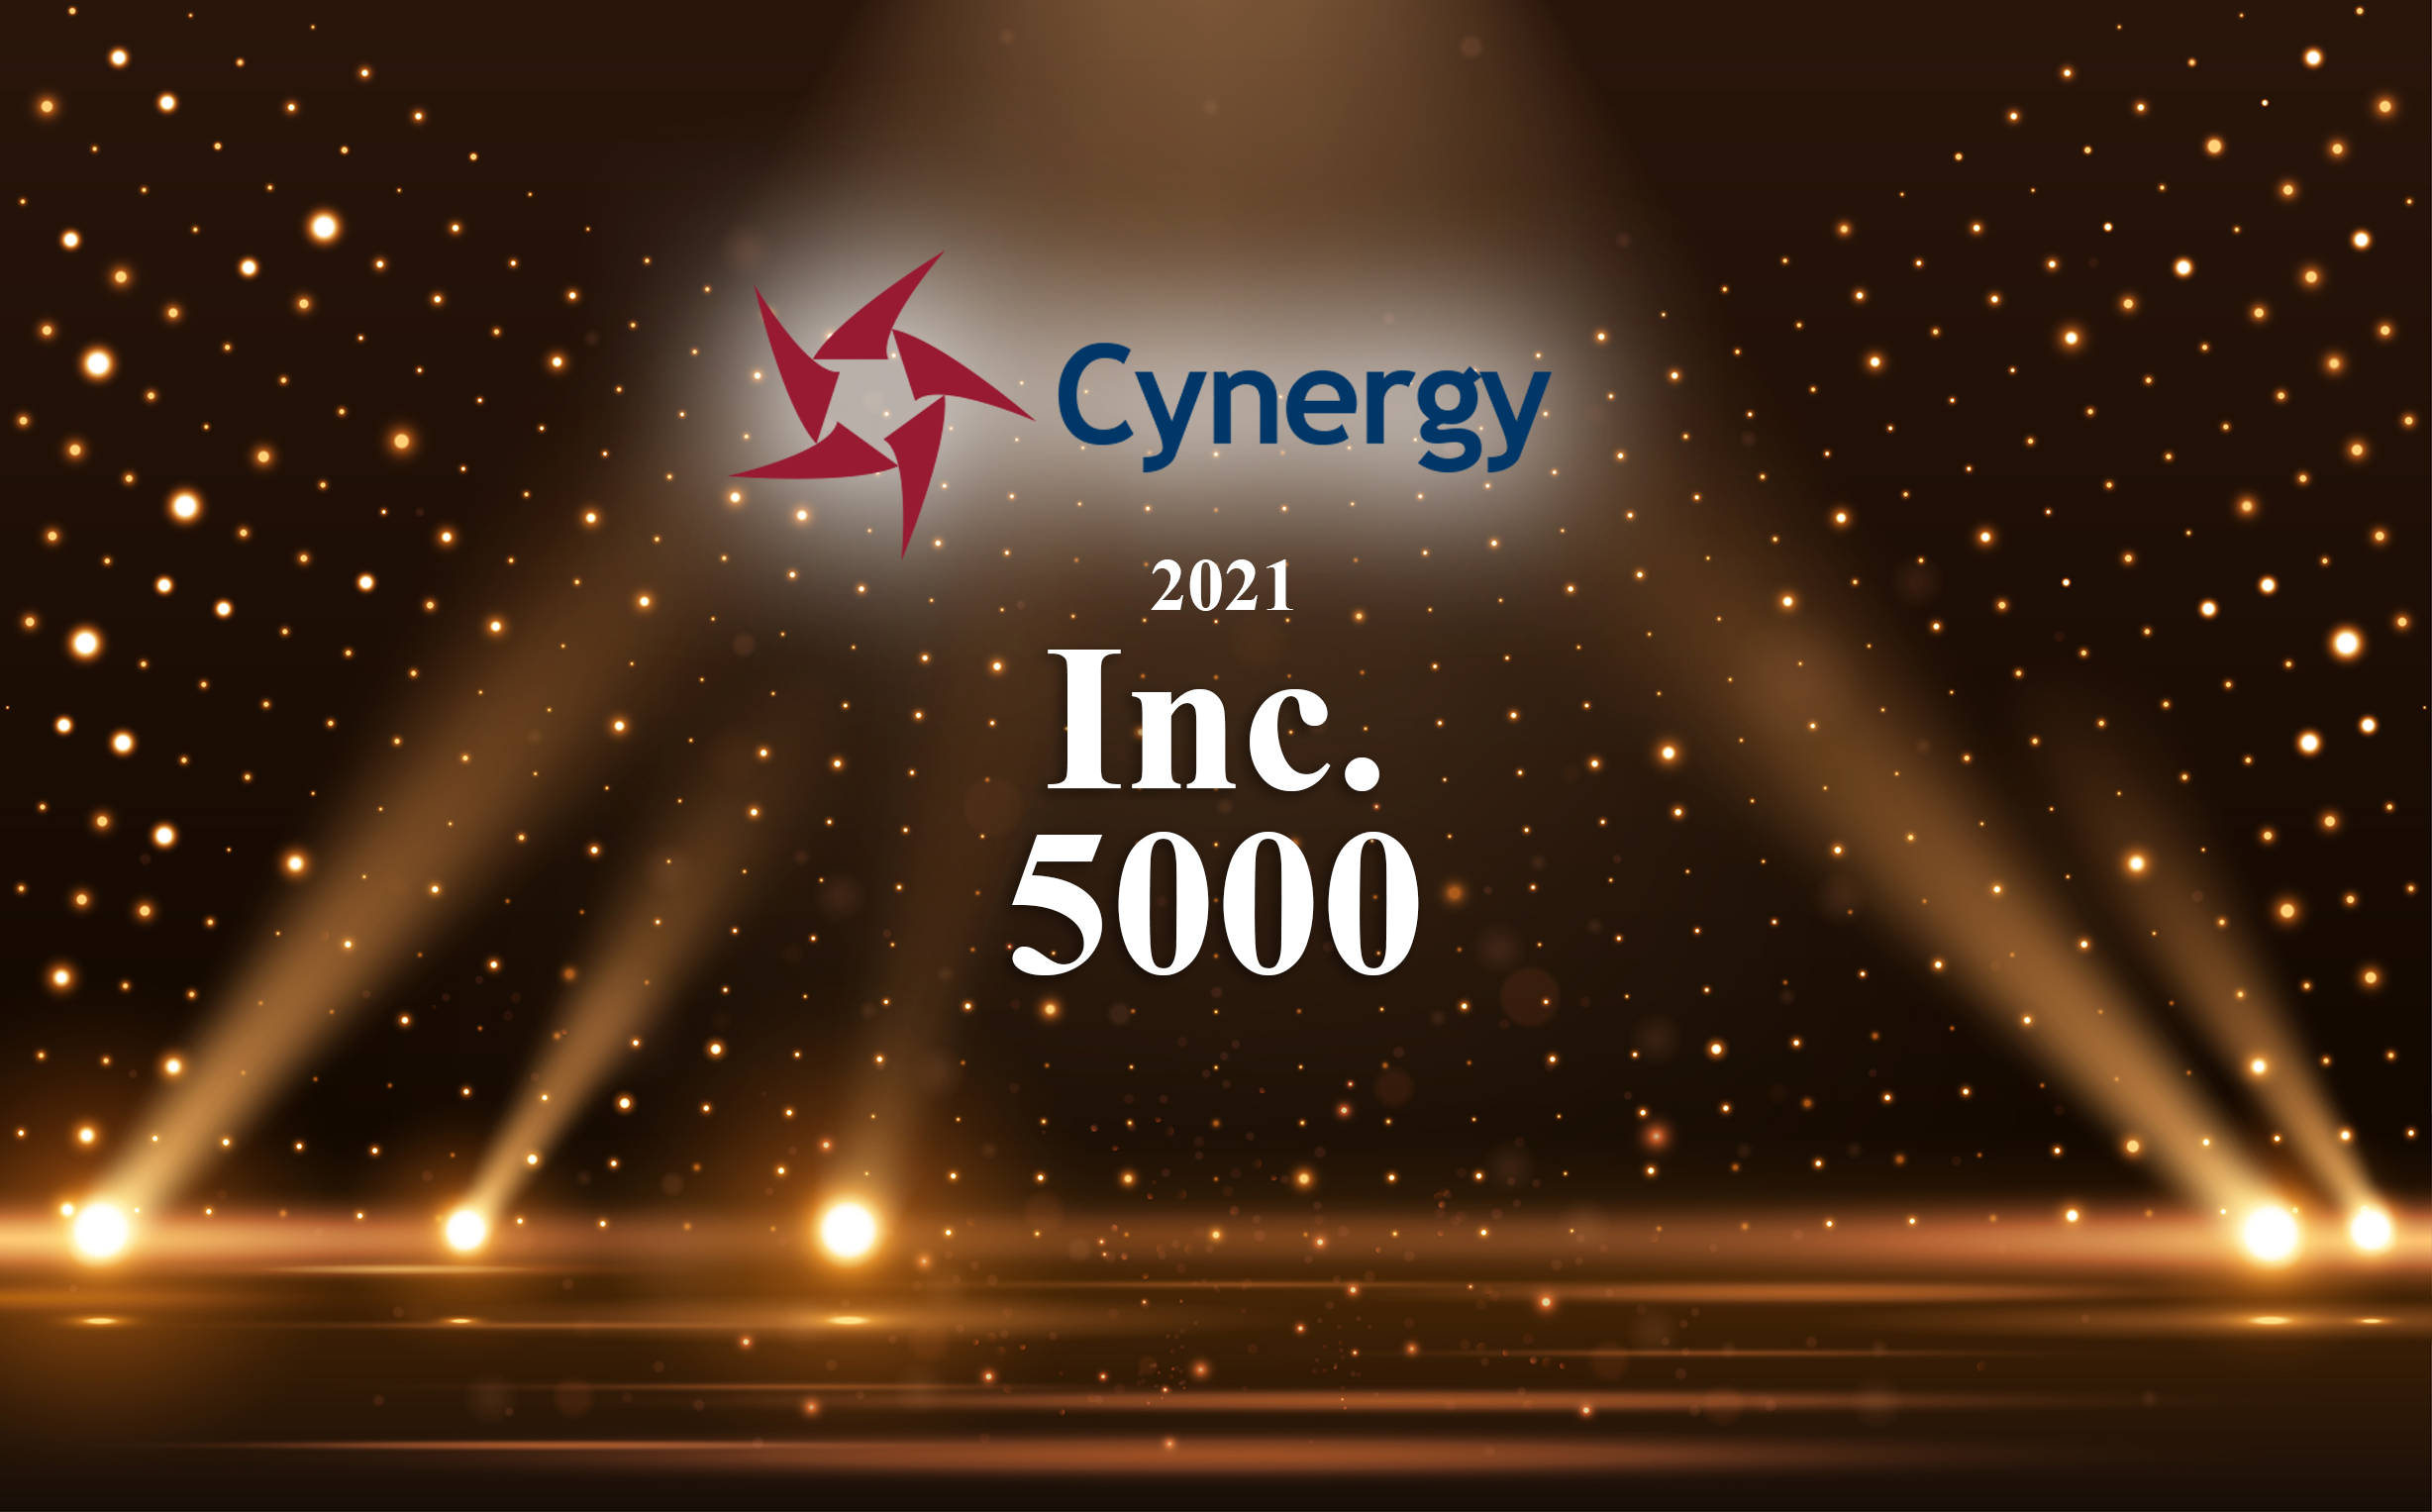 Cynergy Professional Systems Recognized as one of America’s Fastest-Growing Private Companies on the 2021 Inc. 5000 List